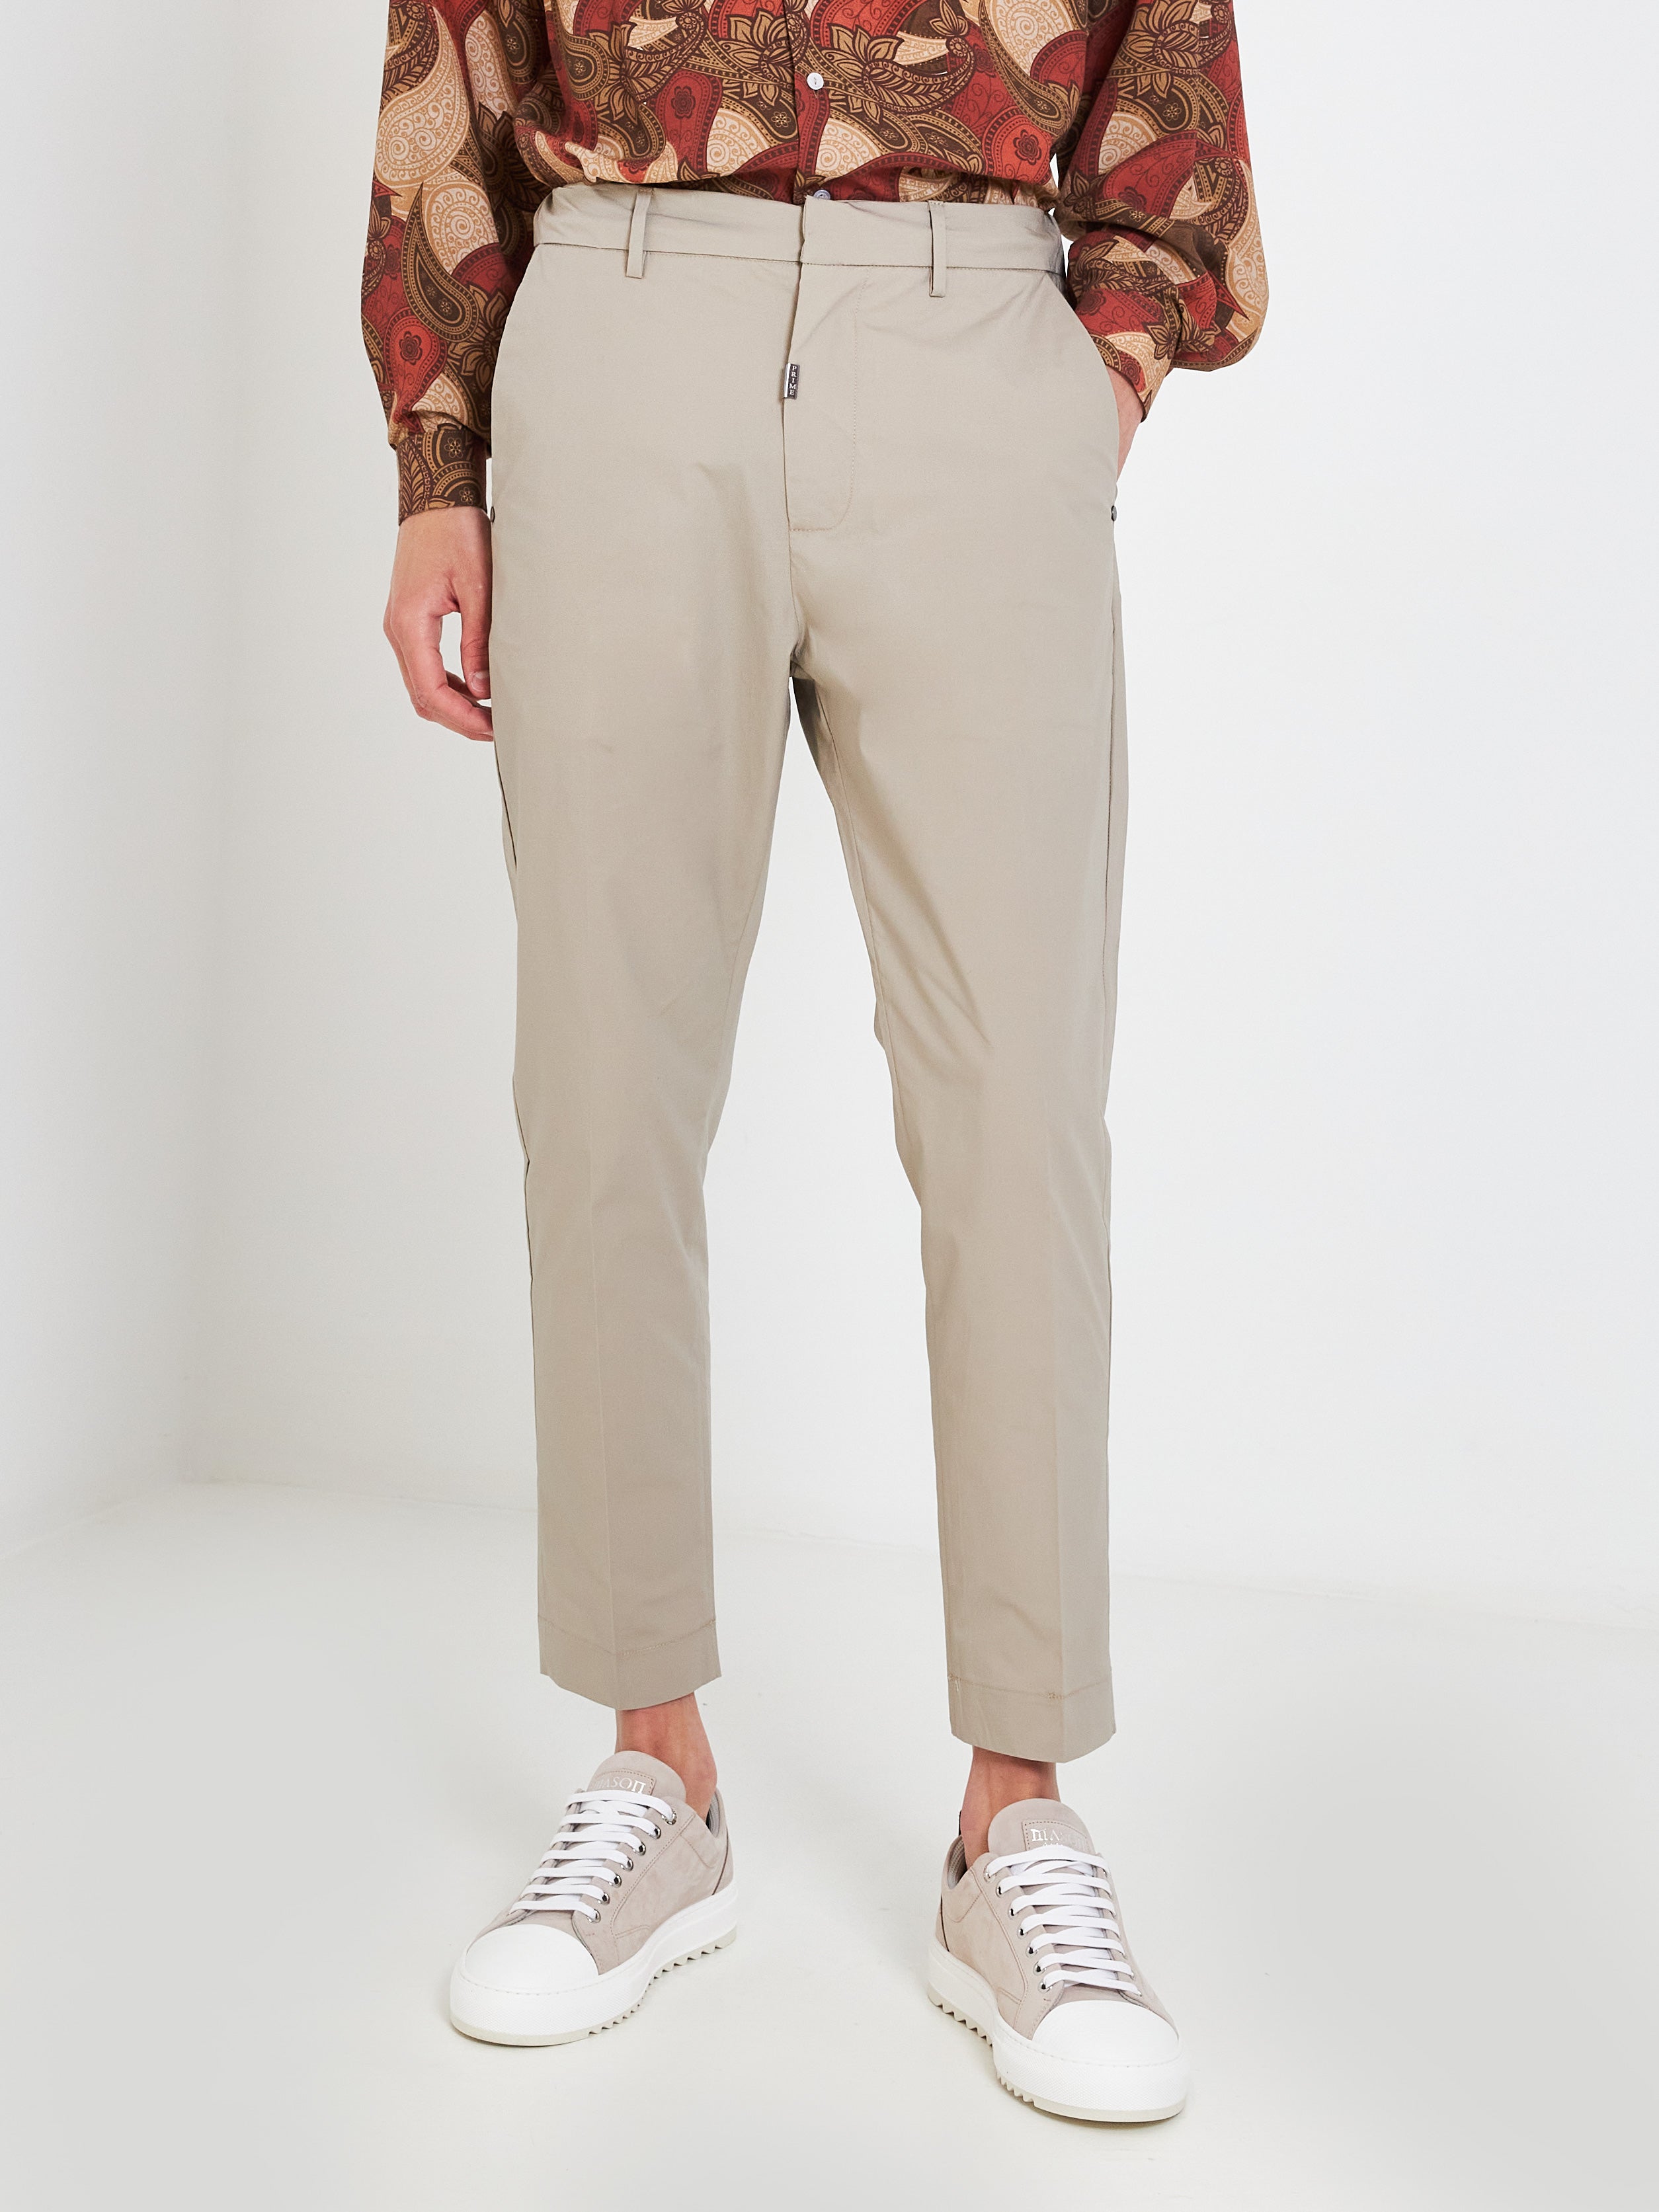 Prime beige trousers